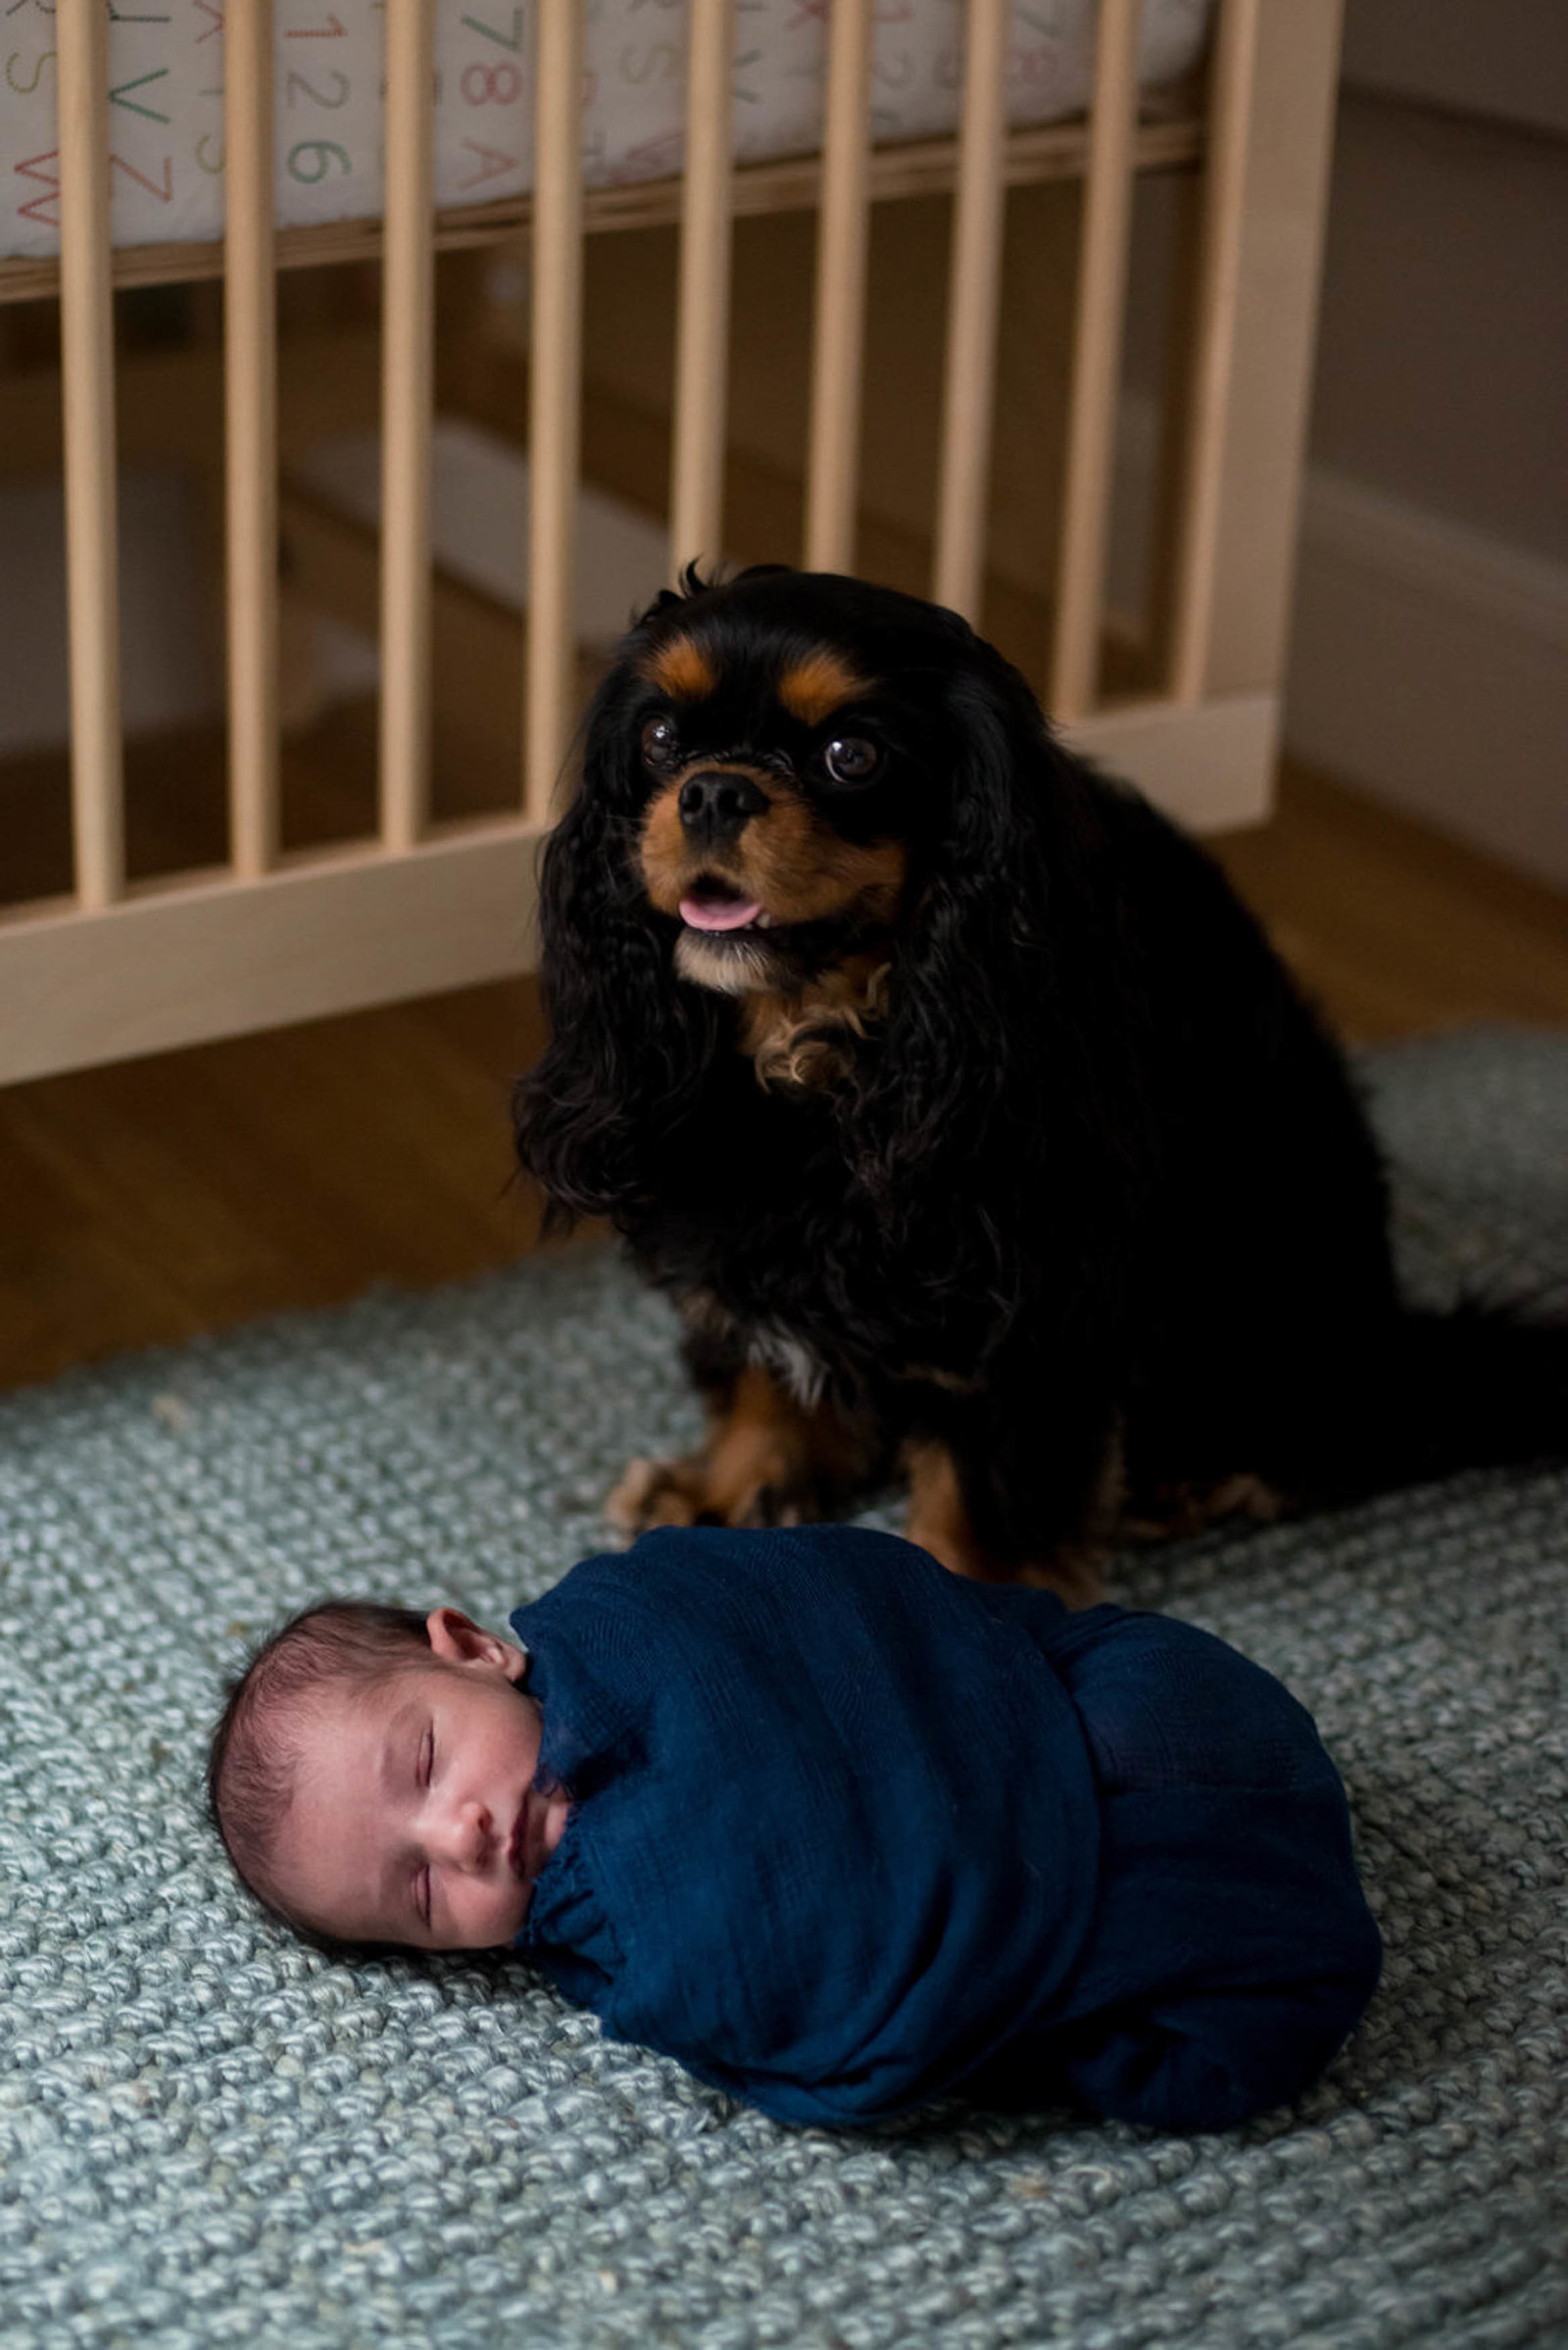 Newborn posed in home with dog in Boston